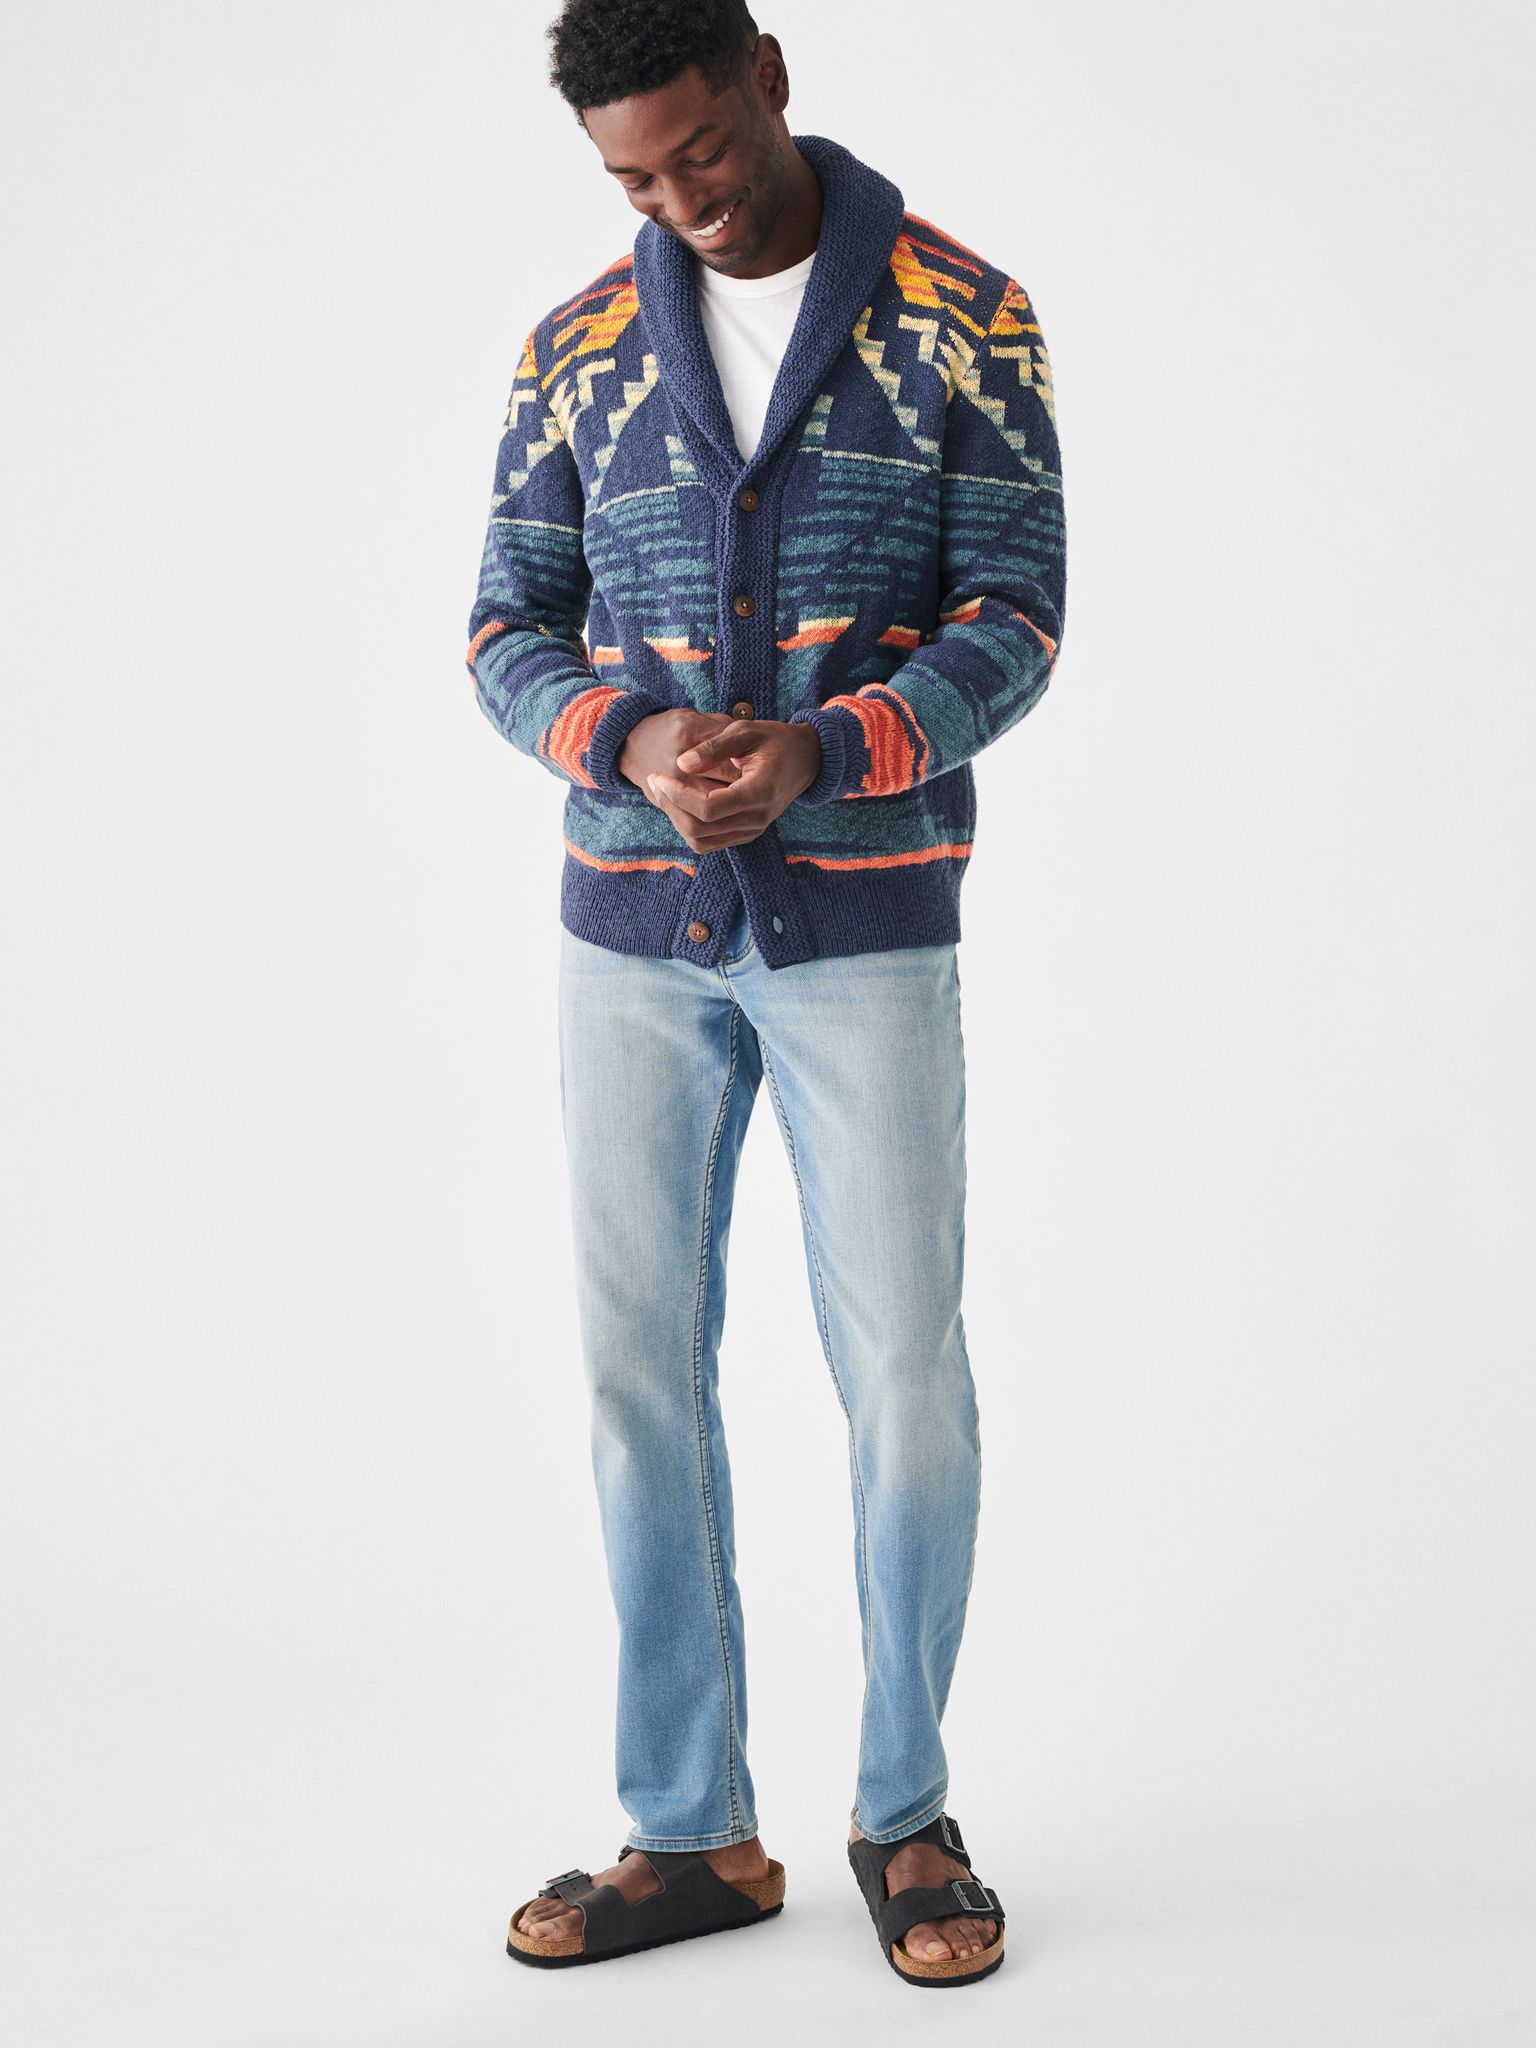 multicolored patterned sweater from Faherty